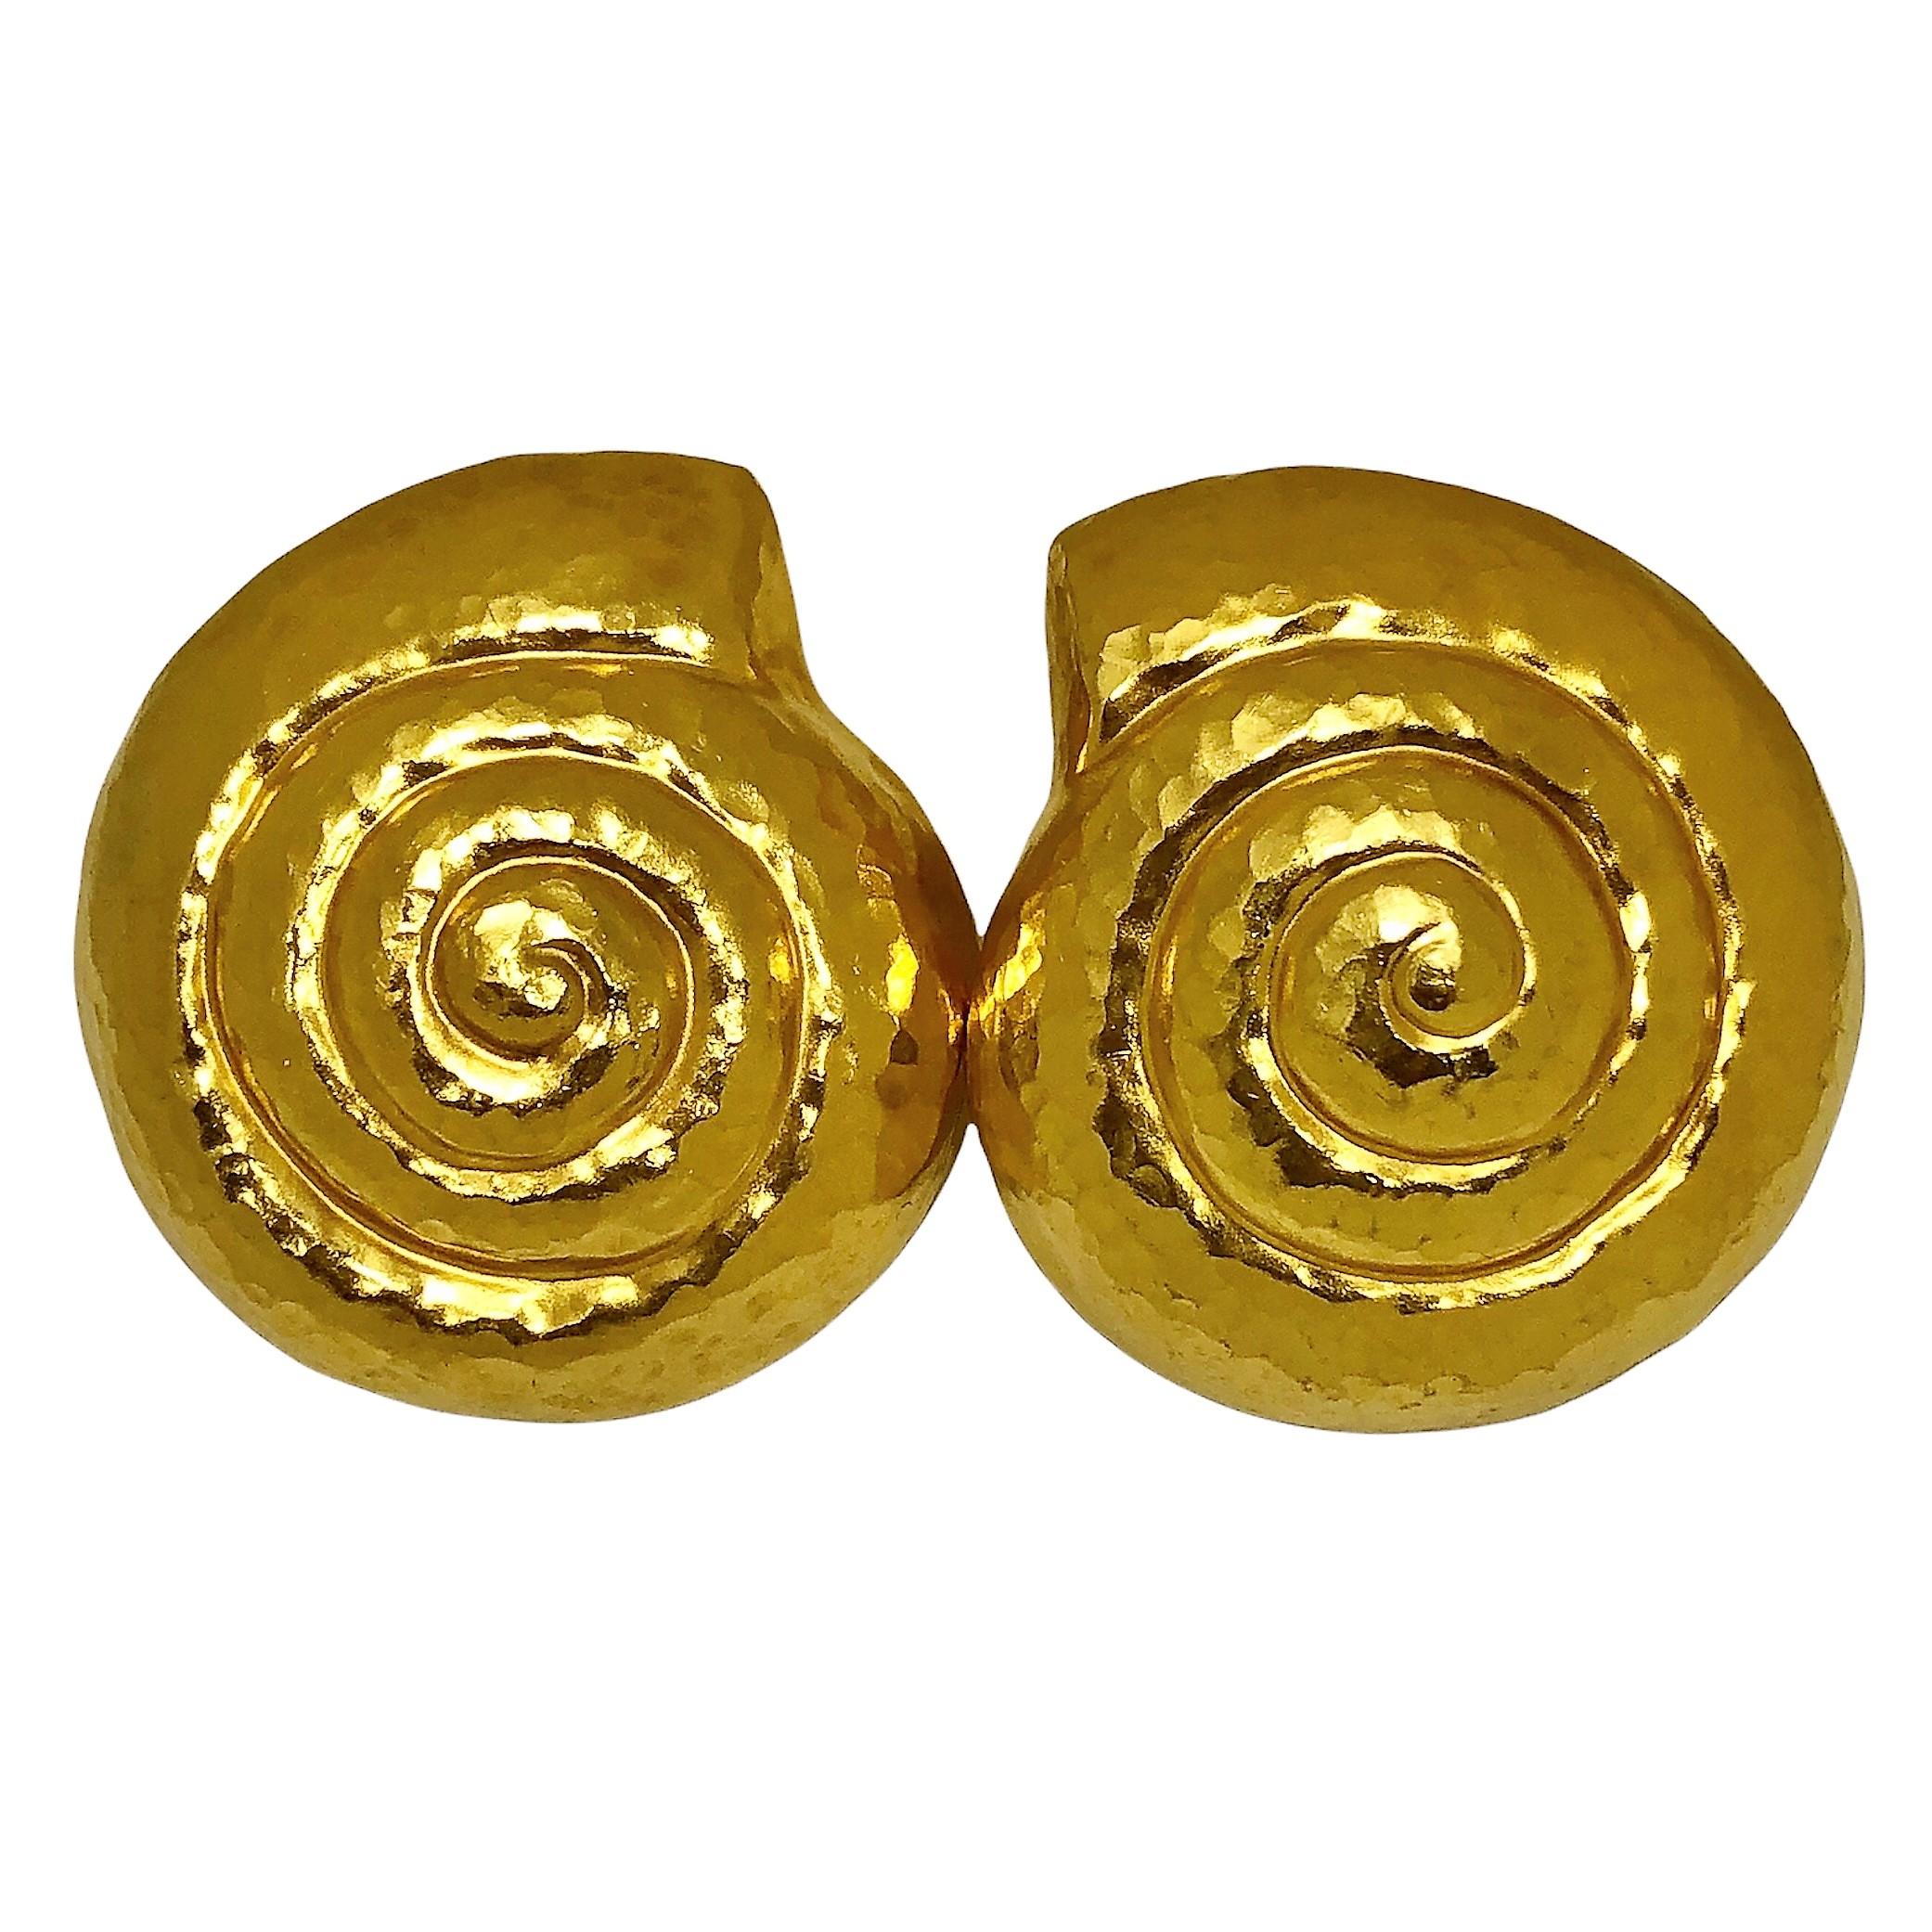 This pair of 22k yellow gold Lalaounis Nautilus shell motif earrings are hand hammered over their entire front and rear surface, and come equipped with clip backs. They are quite large, measuring 
1 1/2 inches by 1 3/8 inches in diameter and are